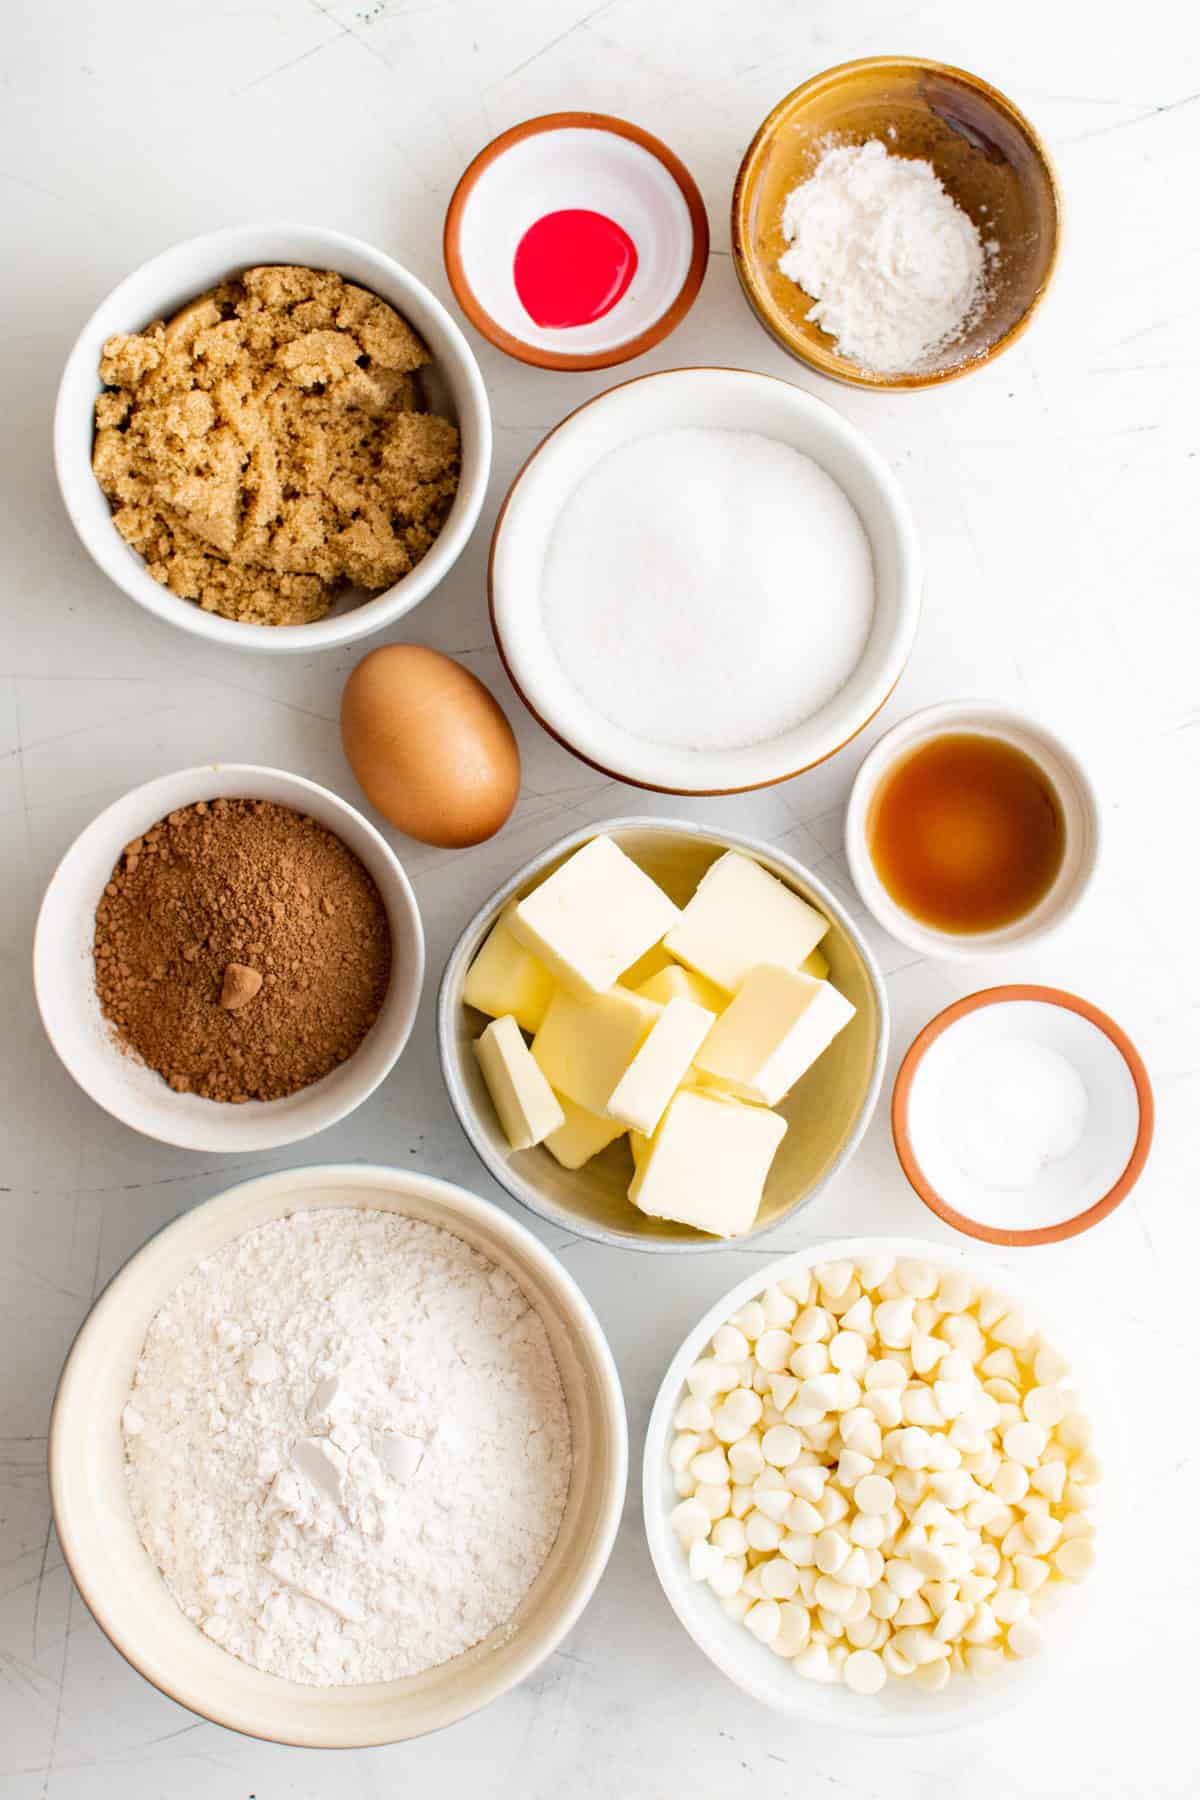 ingredients to make red velvet cookies displayed in bowls on white background